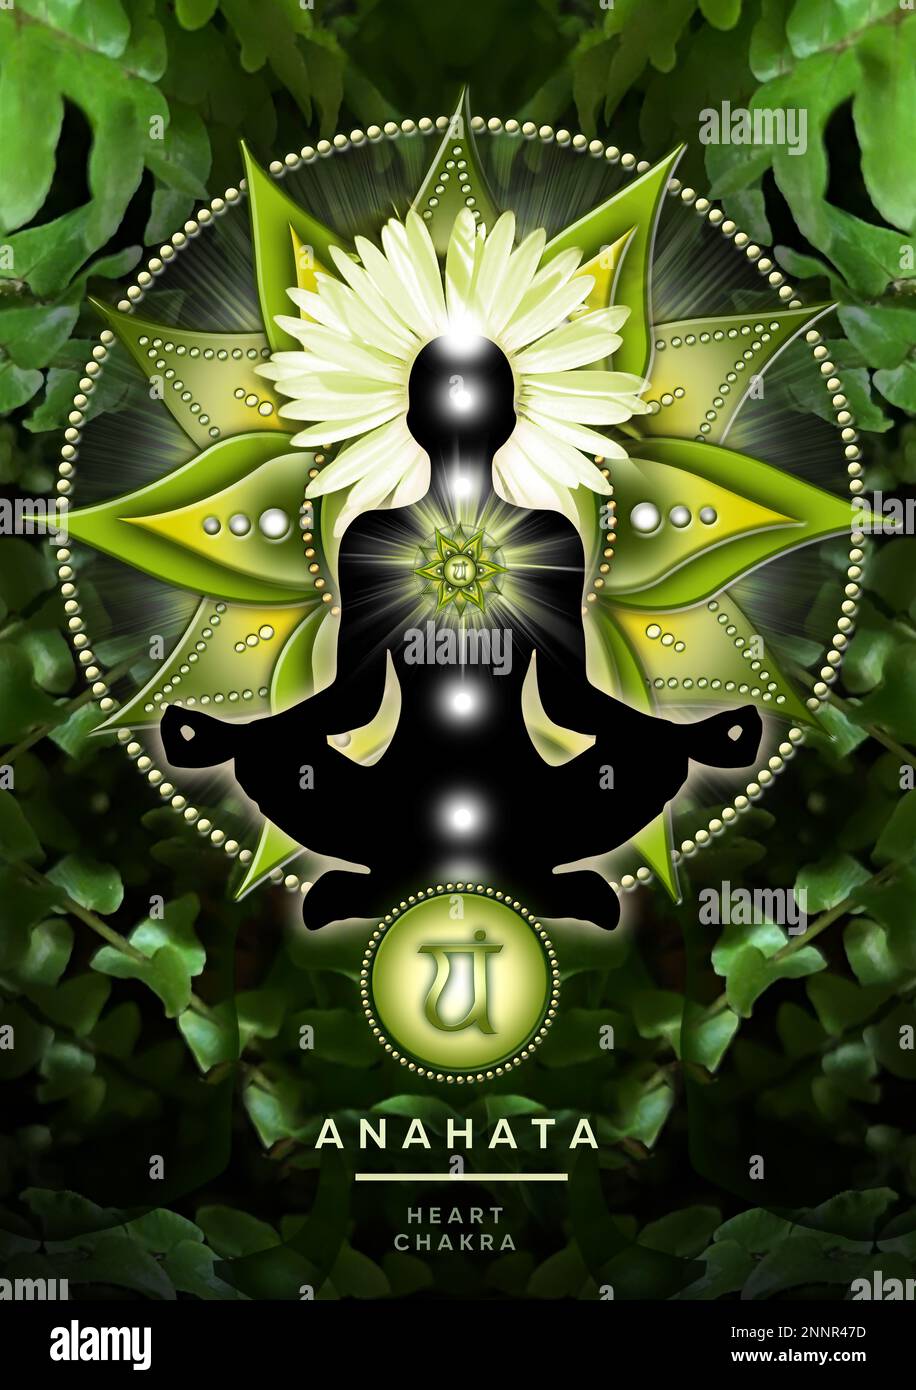 Heart chakra meditation in yoga lotus pose, in front of anahata chakra symbol and calming, green ferns. Stock Photo